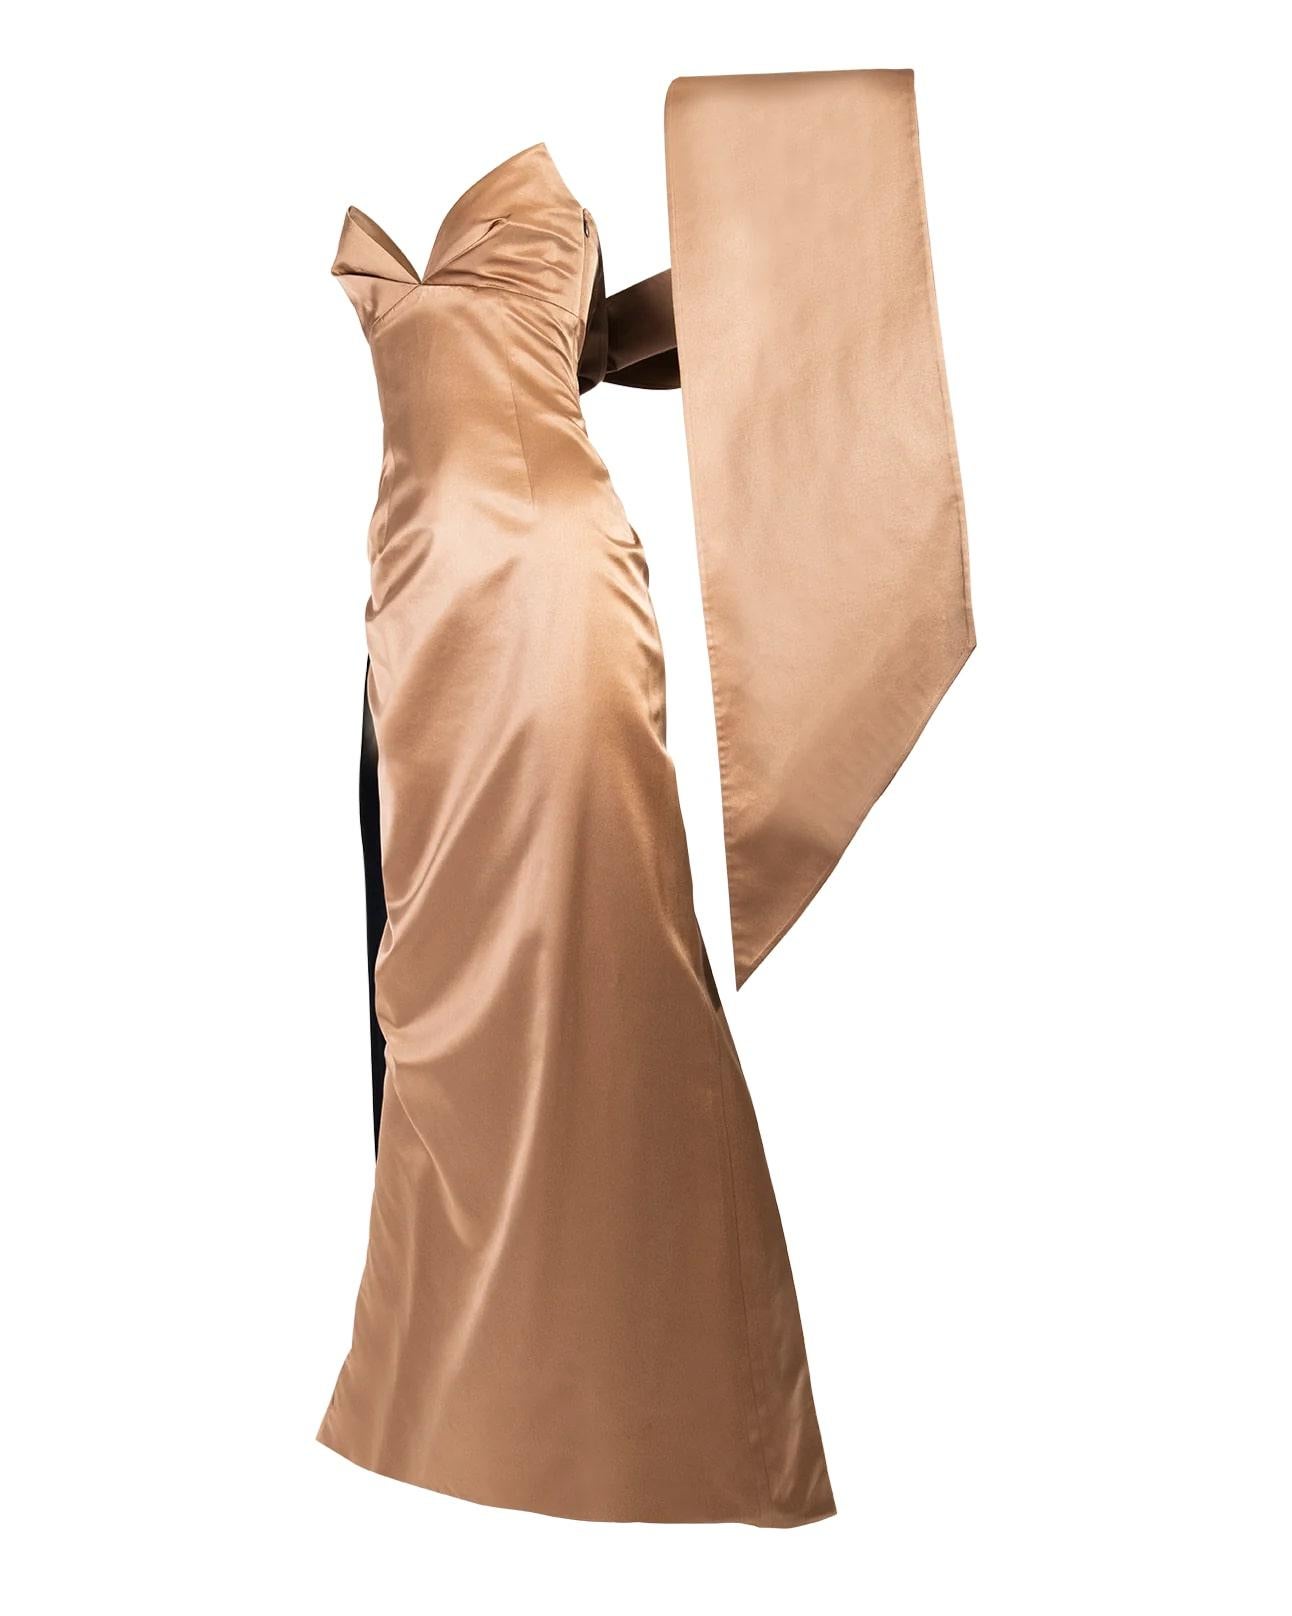 1990’s Richard Tyler Couture (attributed) strapless warm brown silk satin strapless gown. Connected stole drapes across the back, and is color-blocked with a black underside to create a beautiful, unexpected contrast. Missing brand tag.